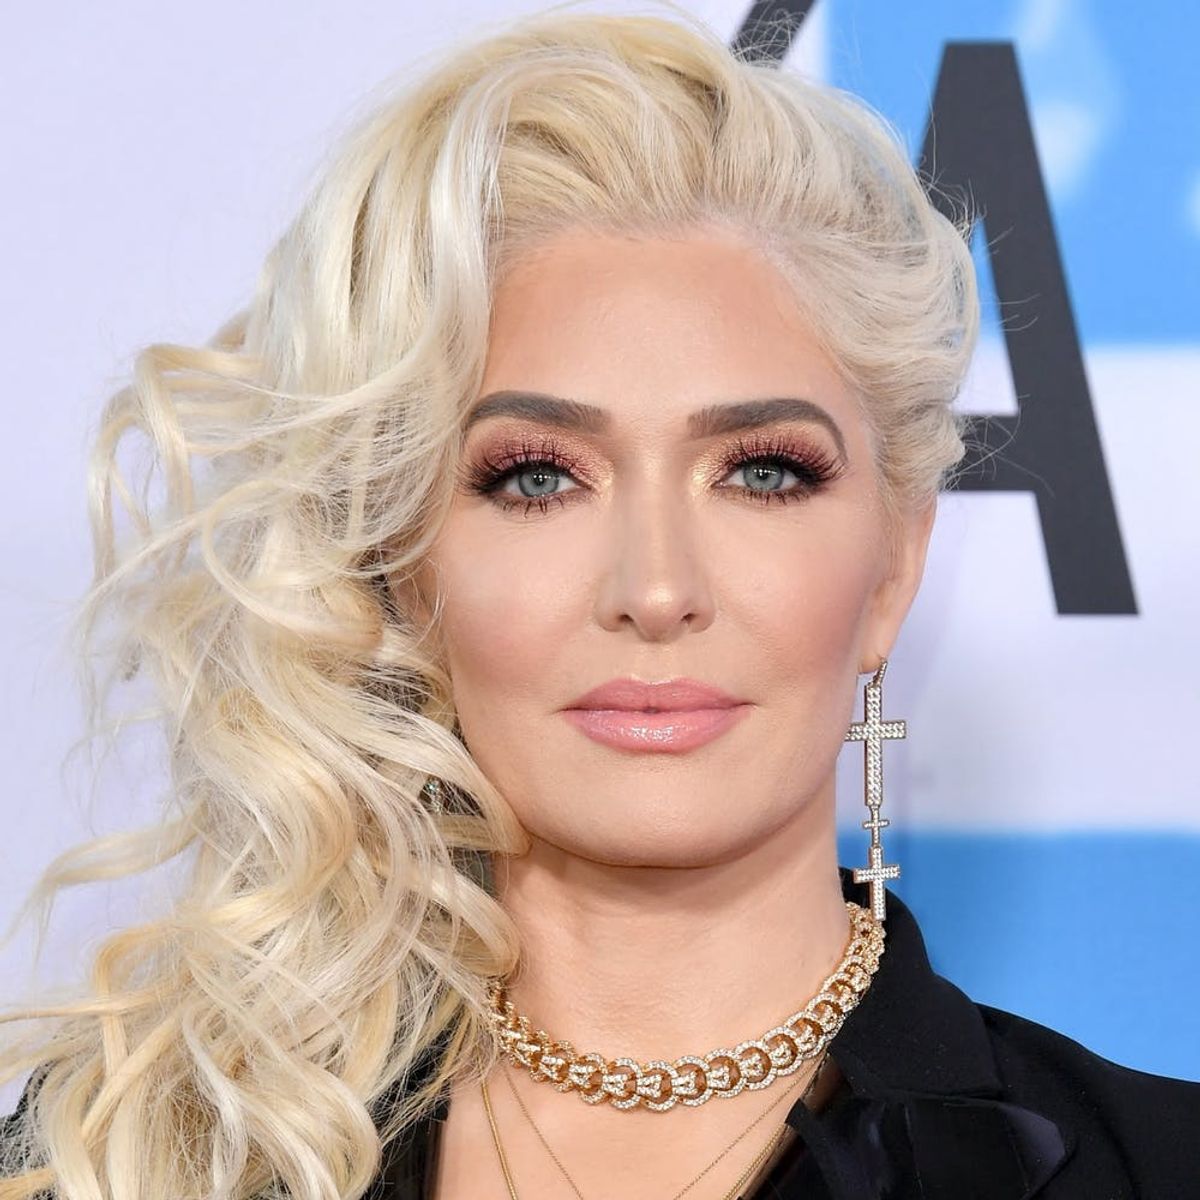 Erika Jayne Just Debuted the Holiday Hair to End All Other Styles